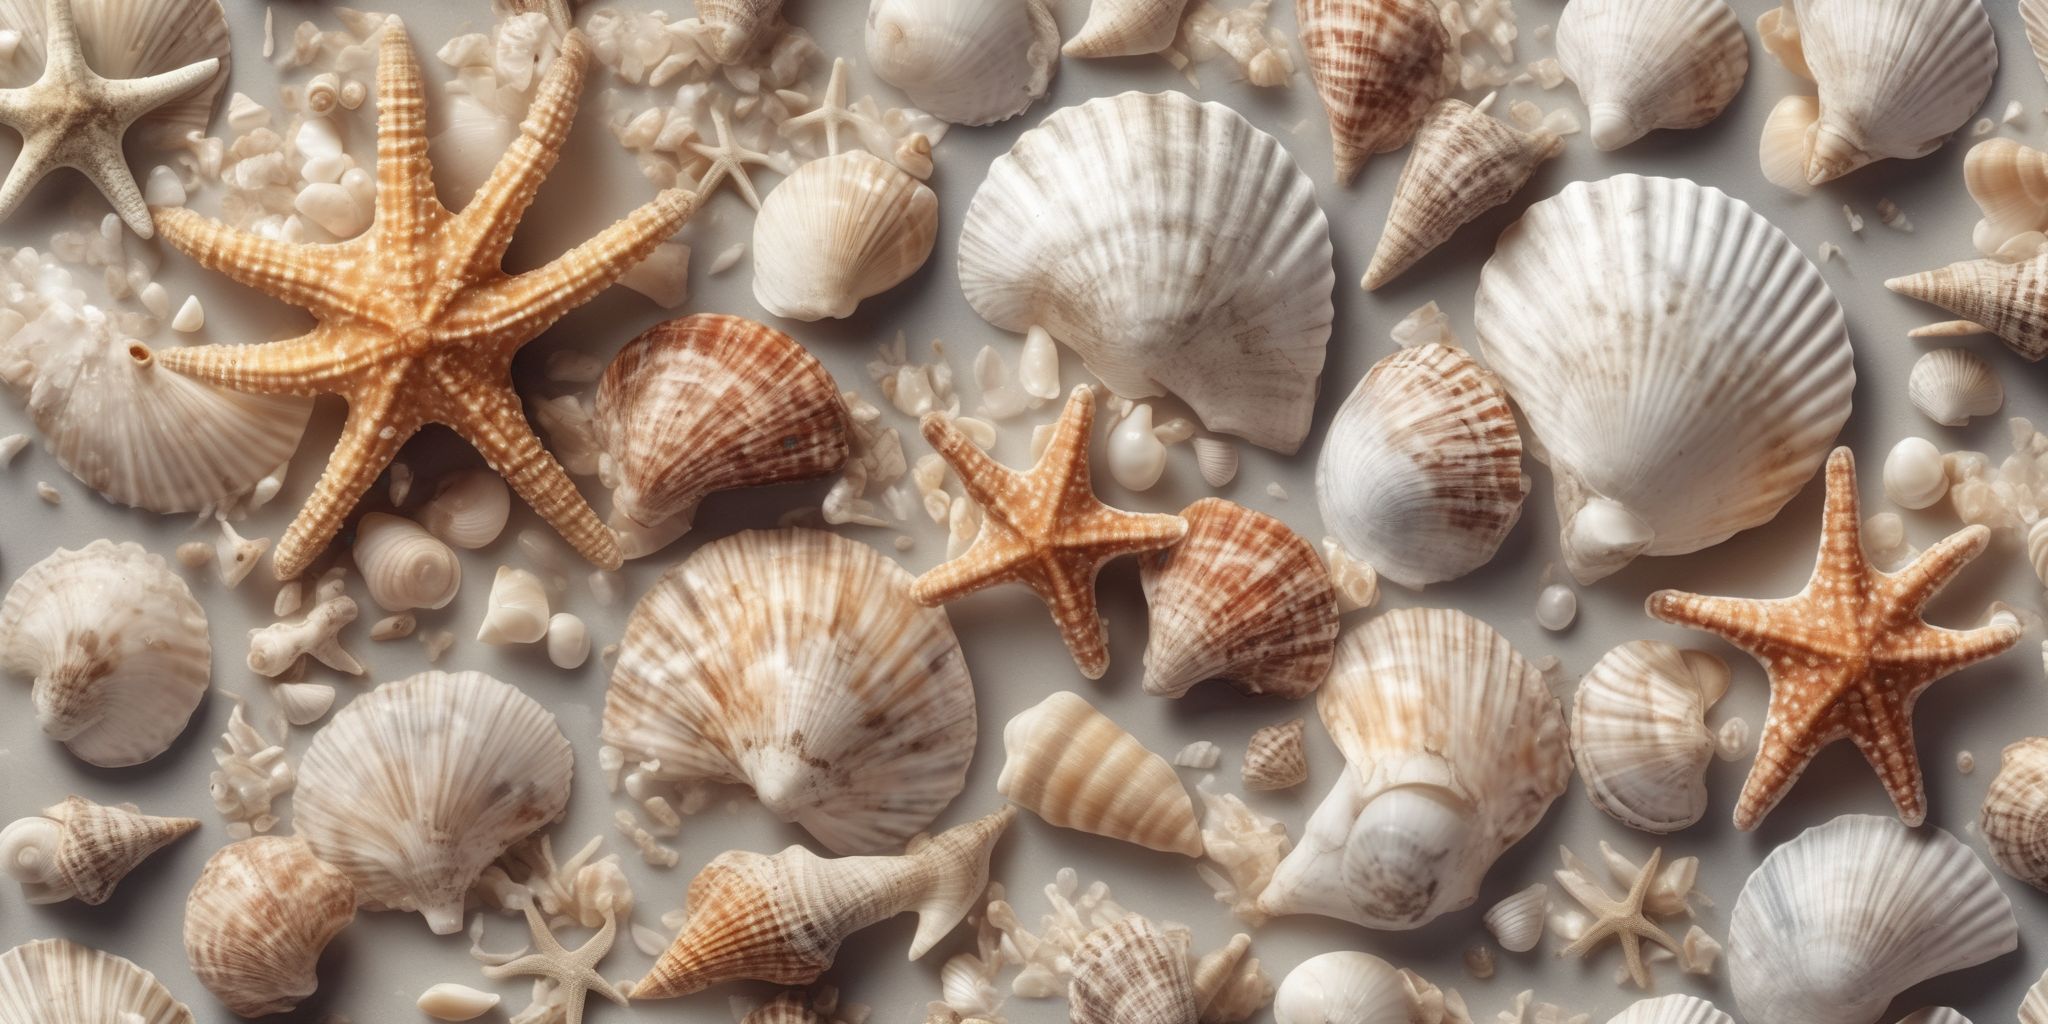 Seashells  in realistic, photographic style